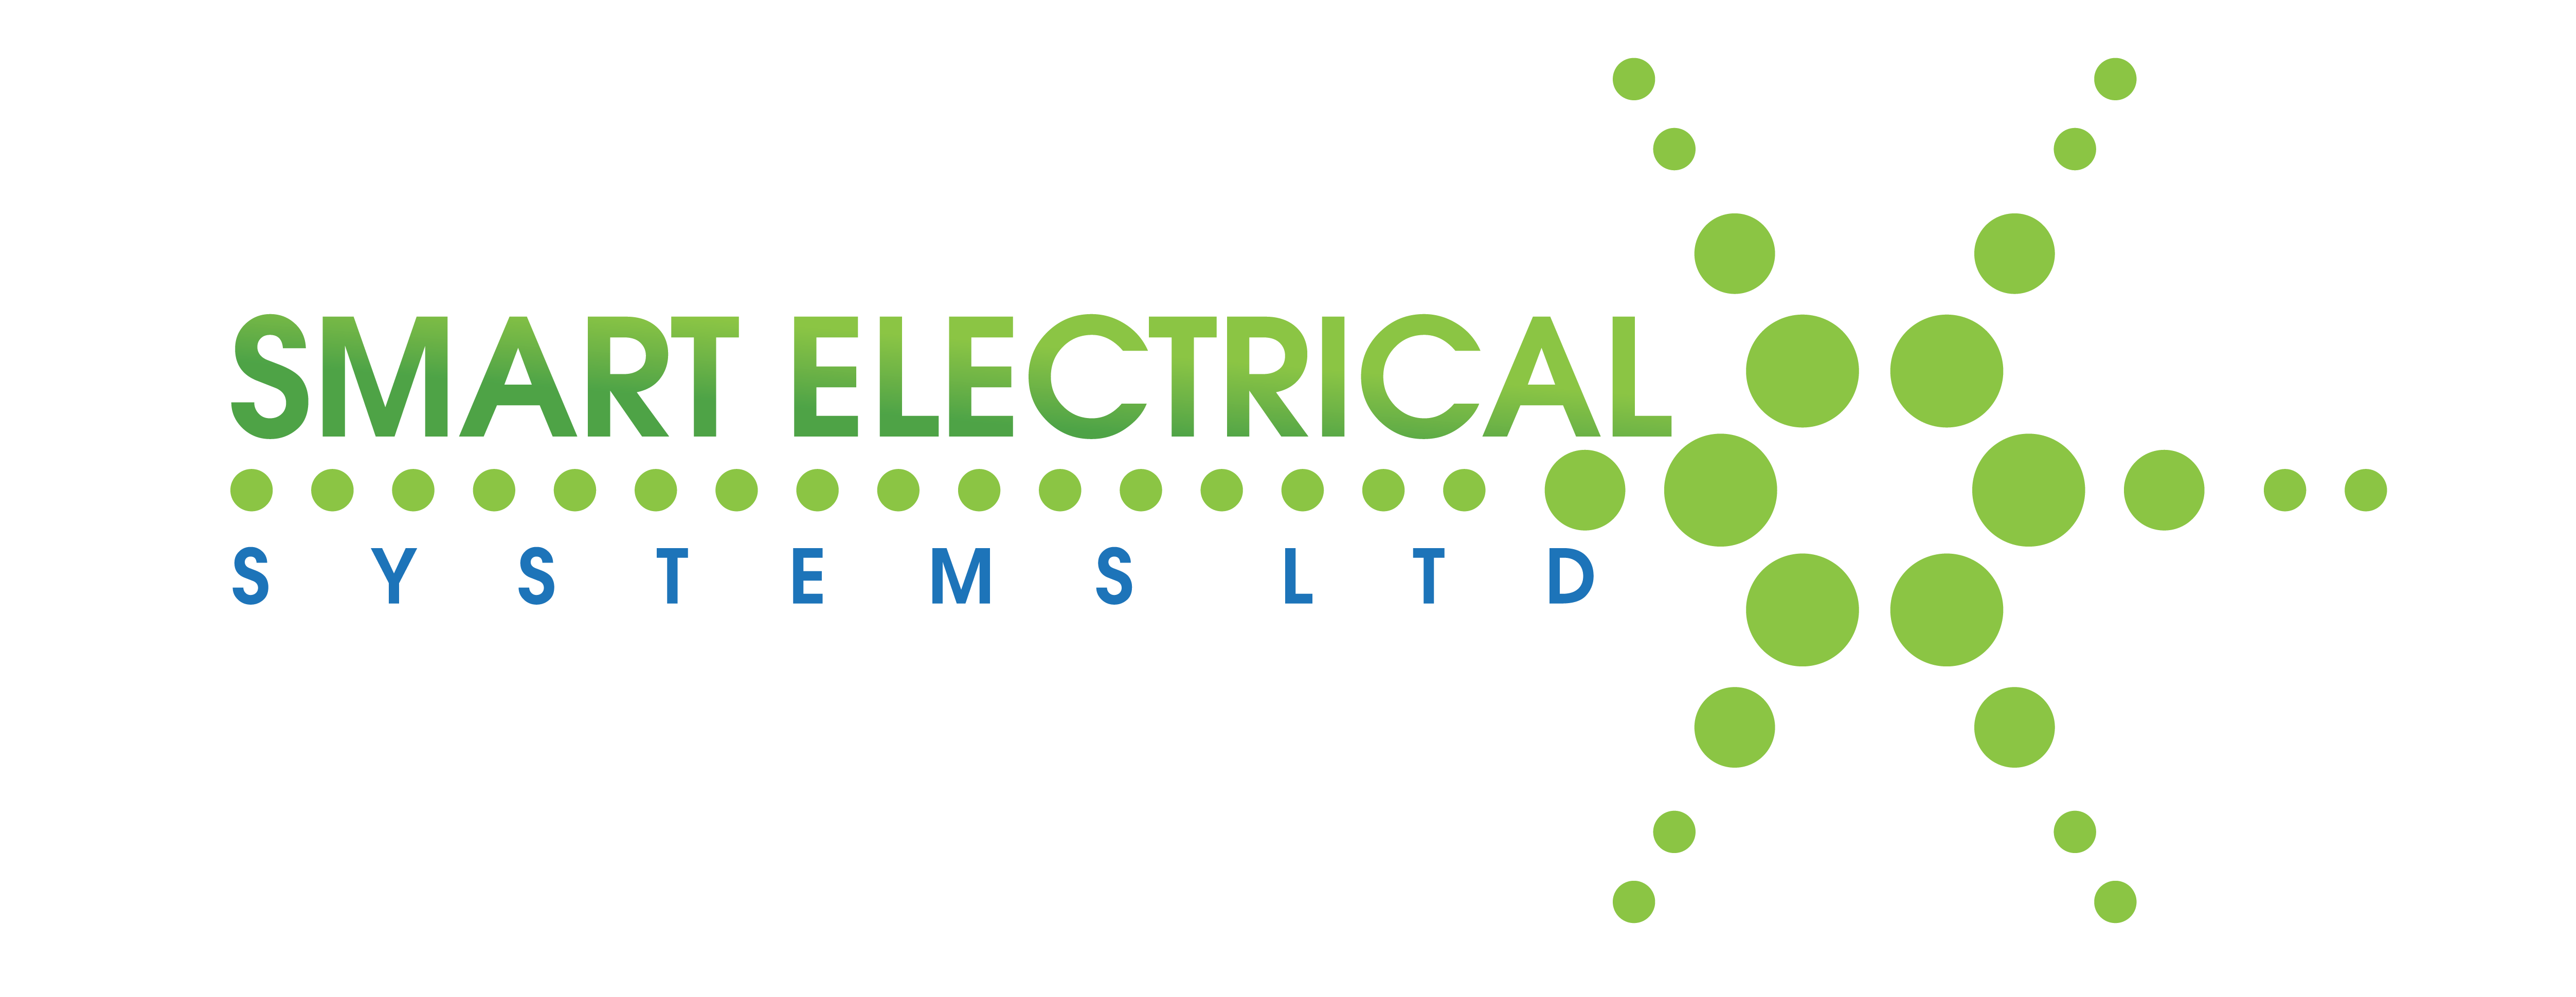 Smart Electrical Systems Ltd